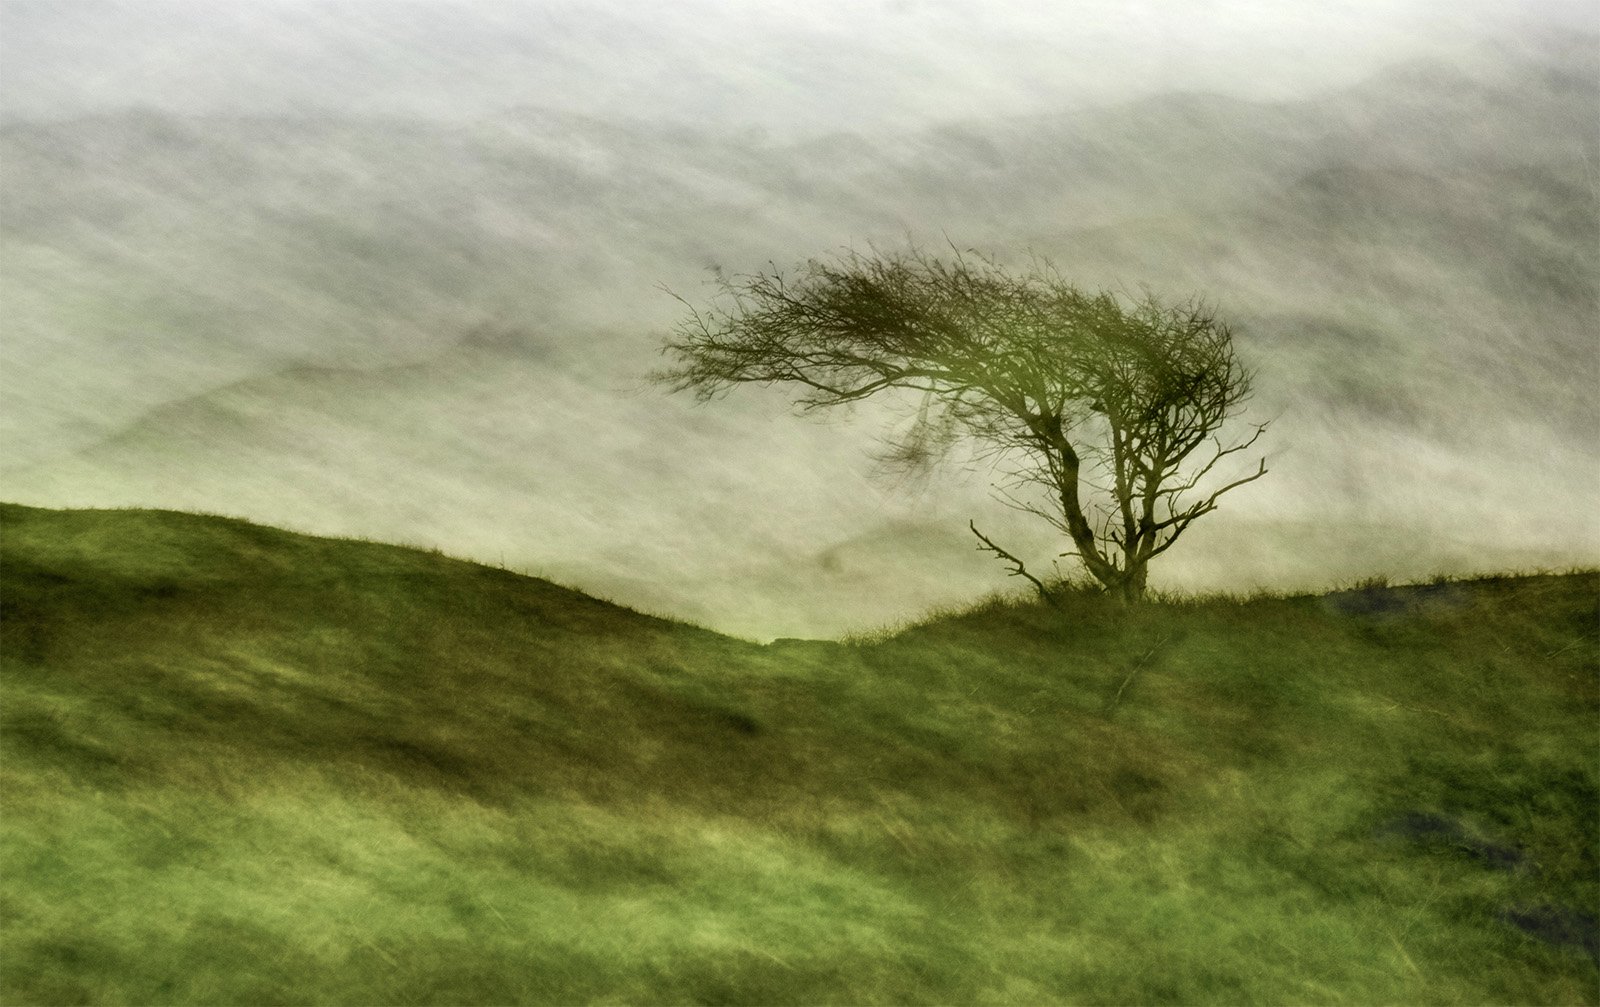 A solitary, windswept tree stands on a grassy hillside under a misty, overcast sky. The surrounding landscape appears blurred by fog, creating an ethereal and dreamlike atmosphere.